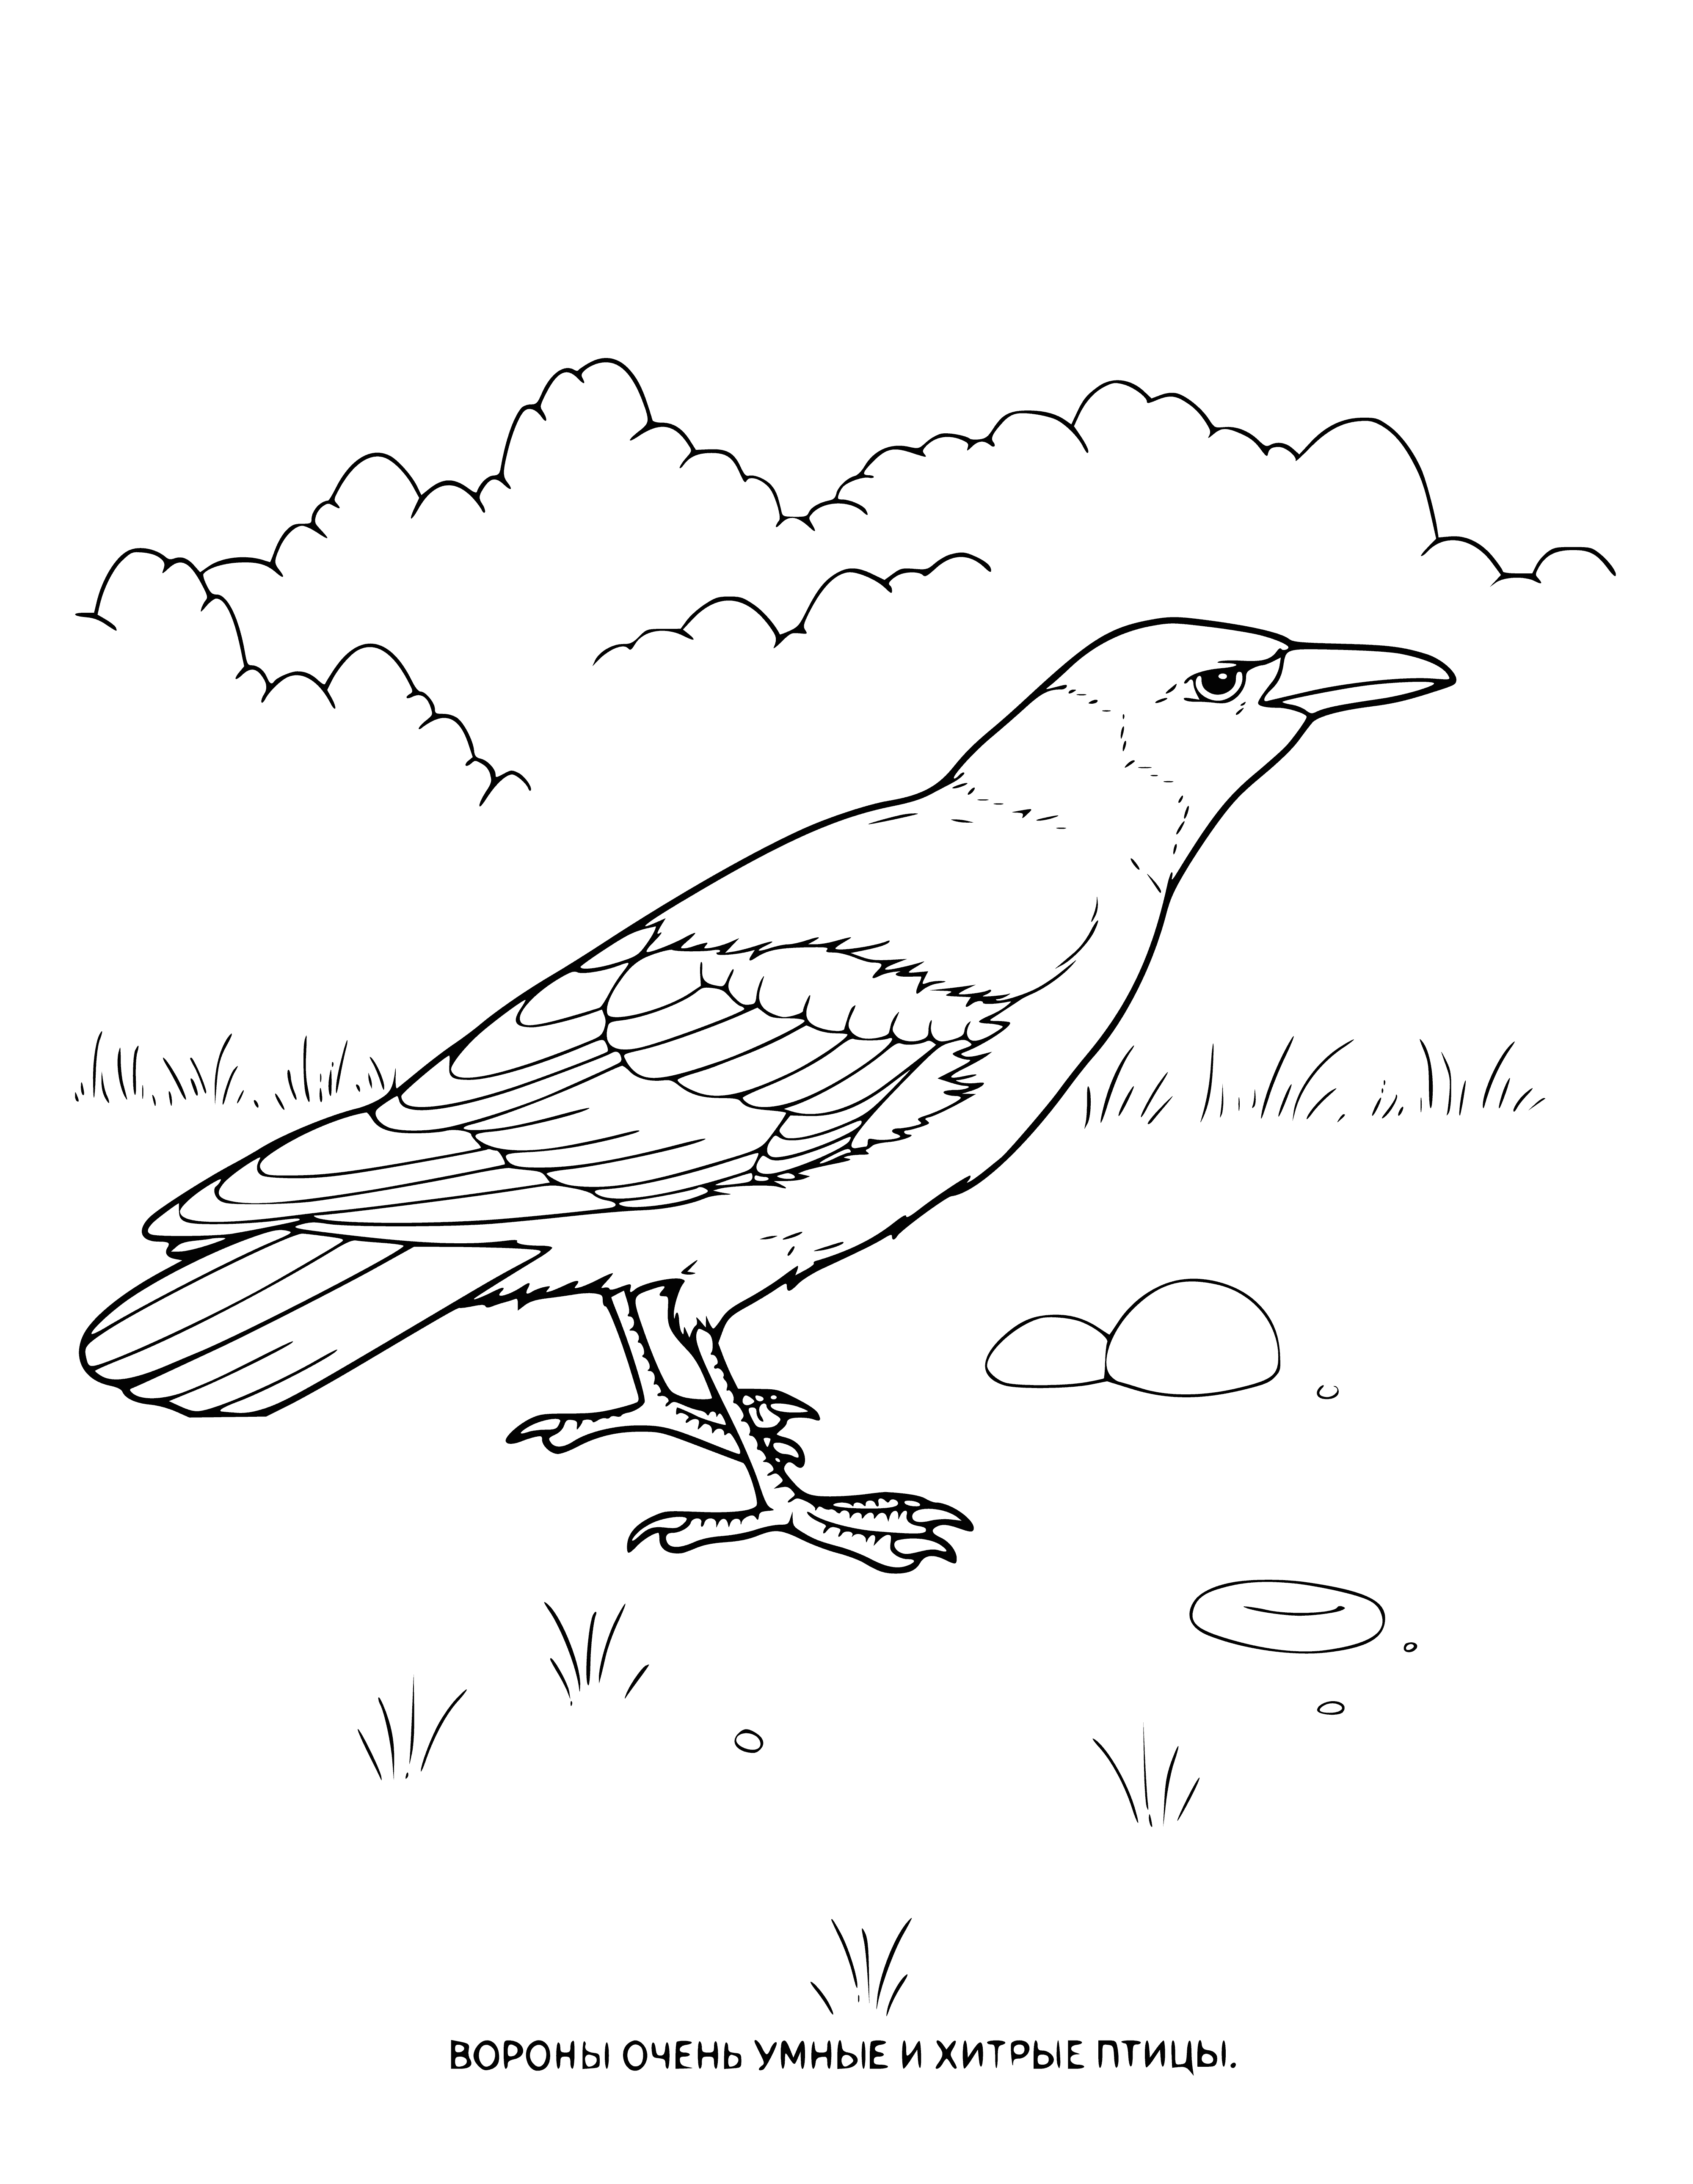 coloring page: Large black bird with curved beak, perched on branch with head tilted, glossy feathers. Eyes black.